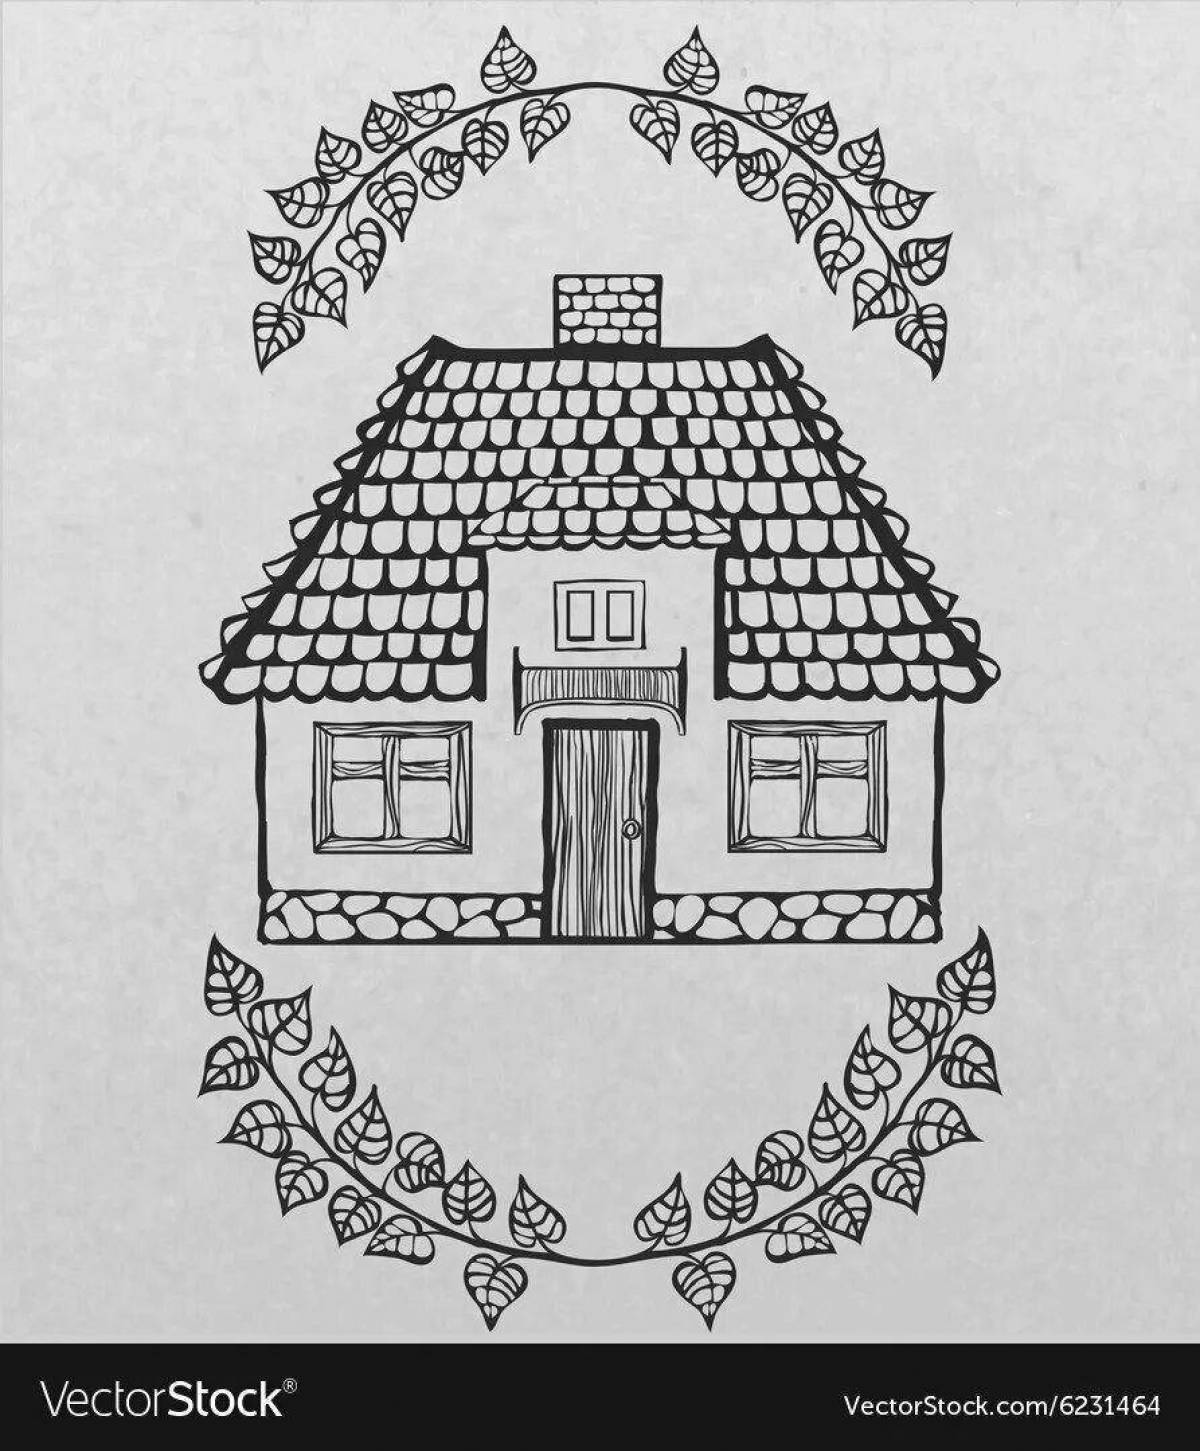 Impressive house roof coloring page